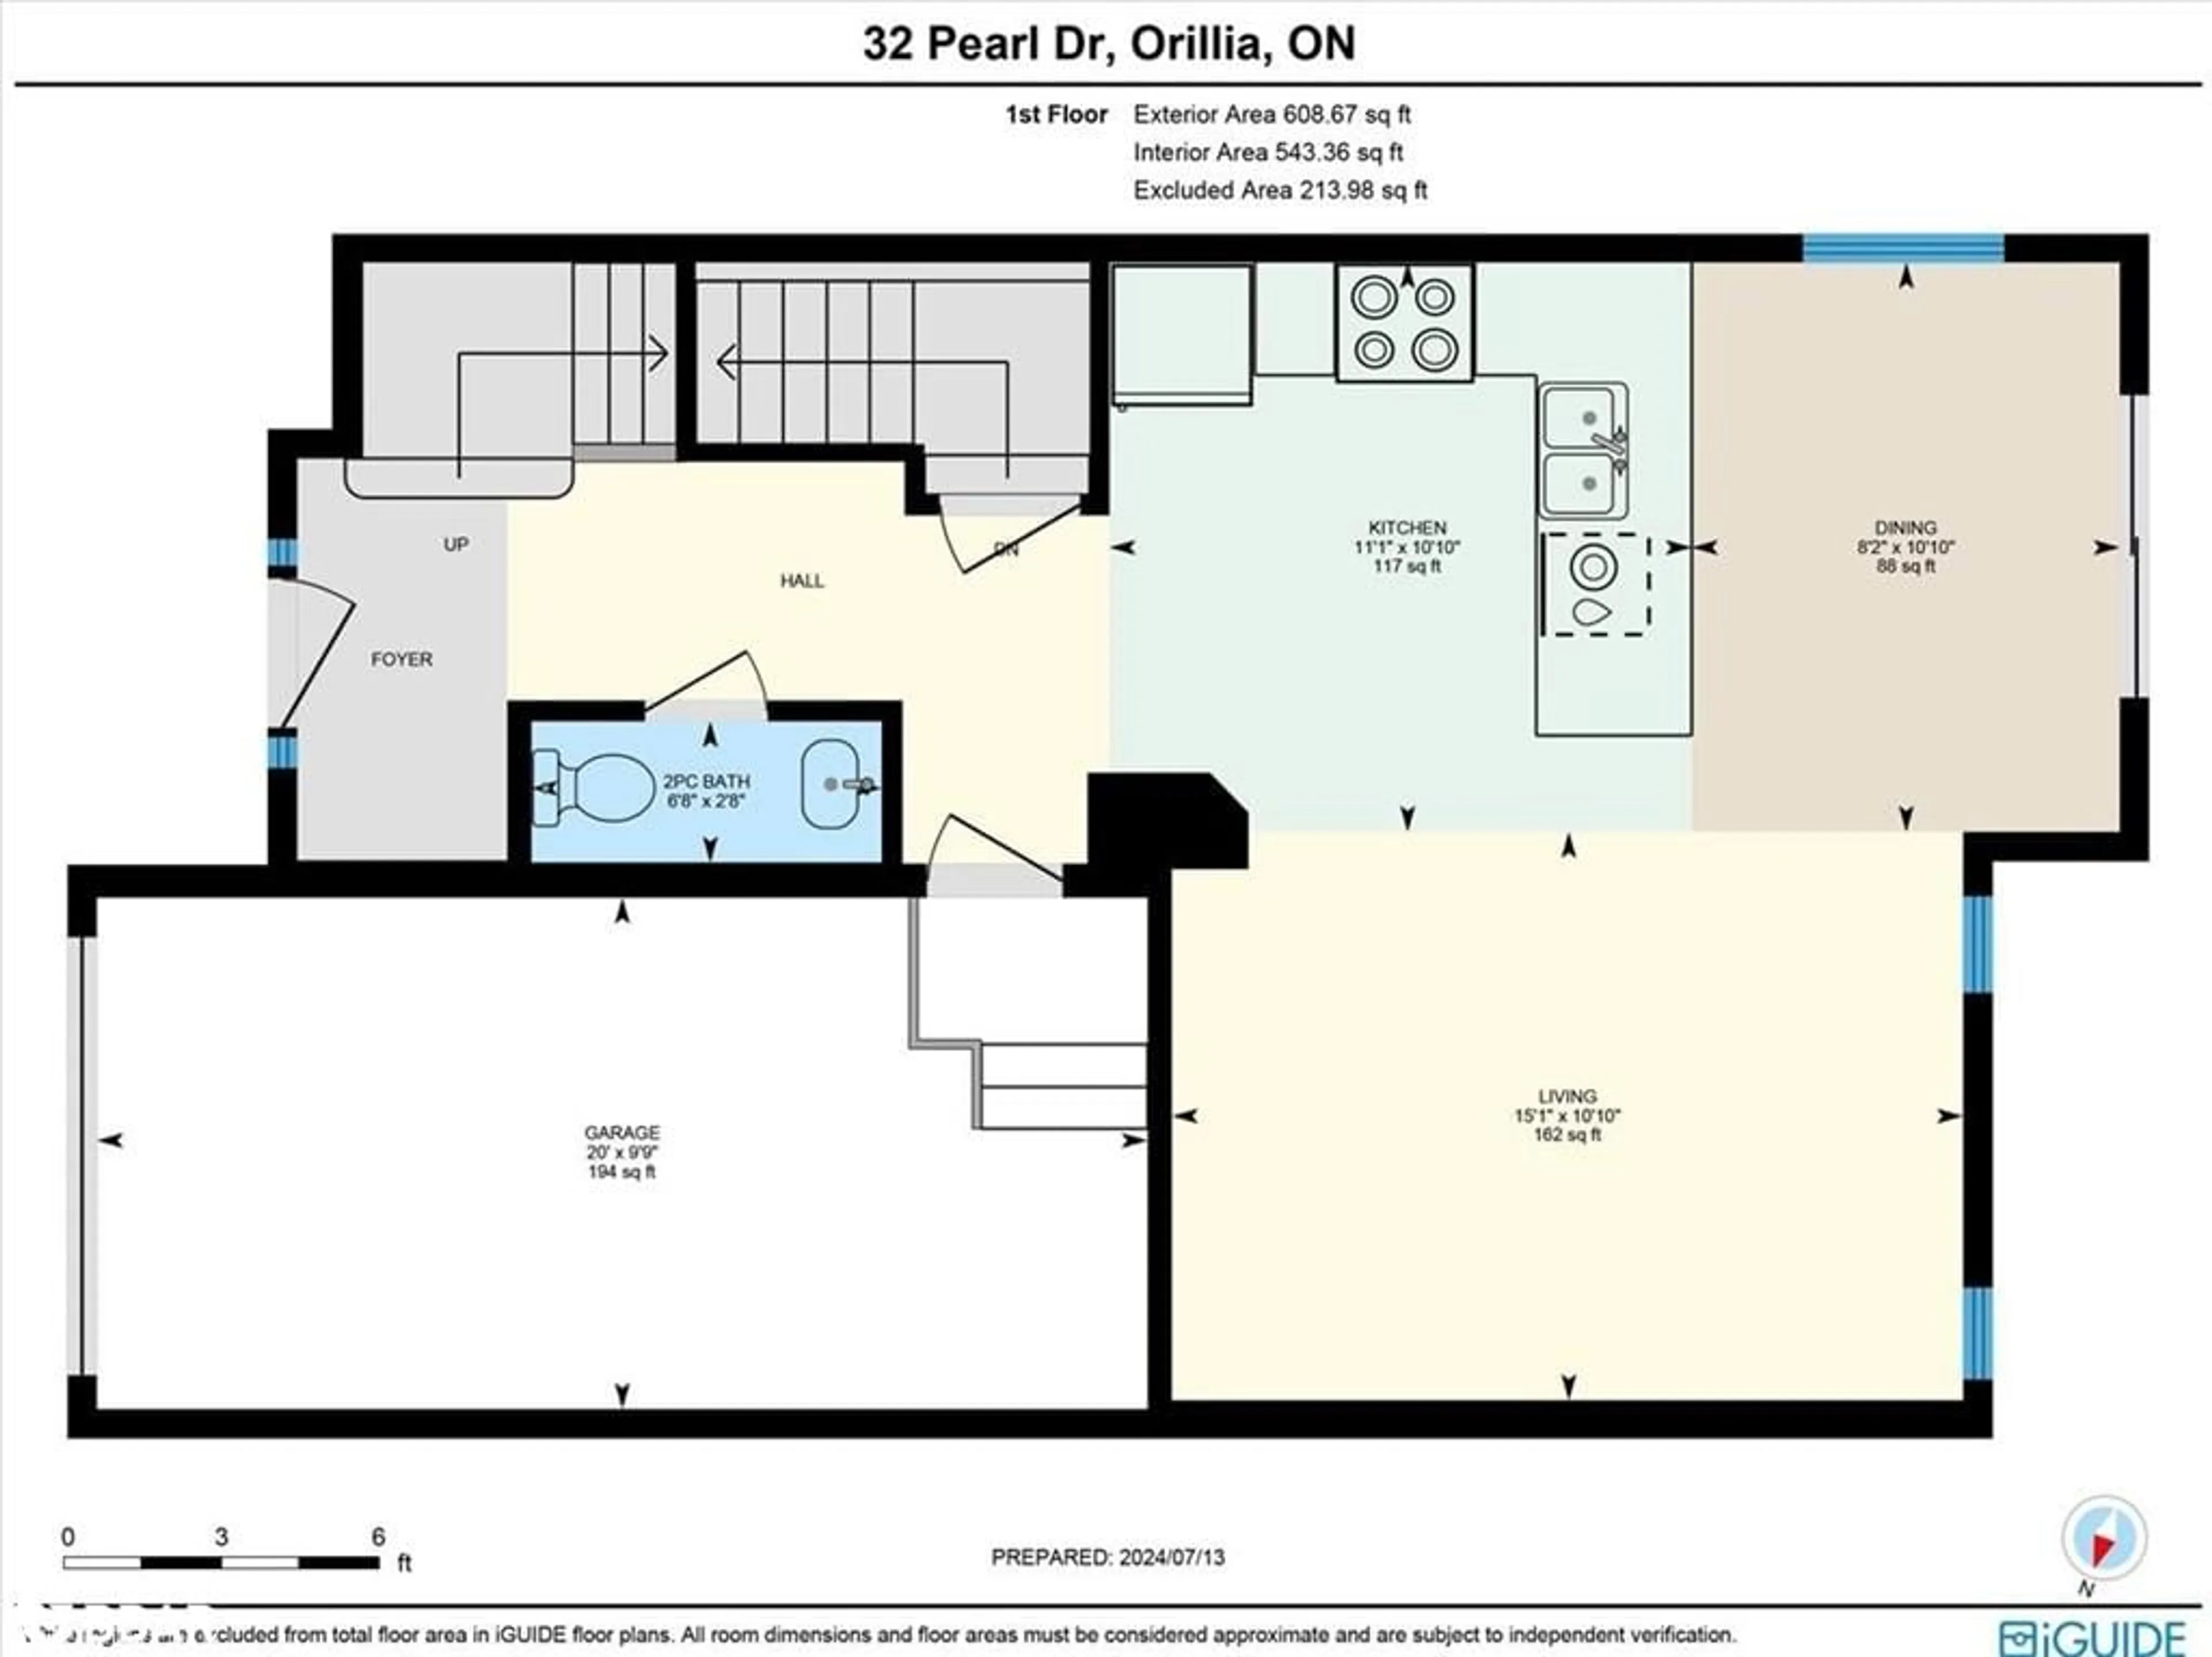 Floor plan for 32 Pearl Dr, Orillia Ontario L3V 0A5